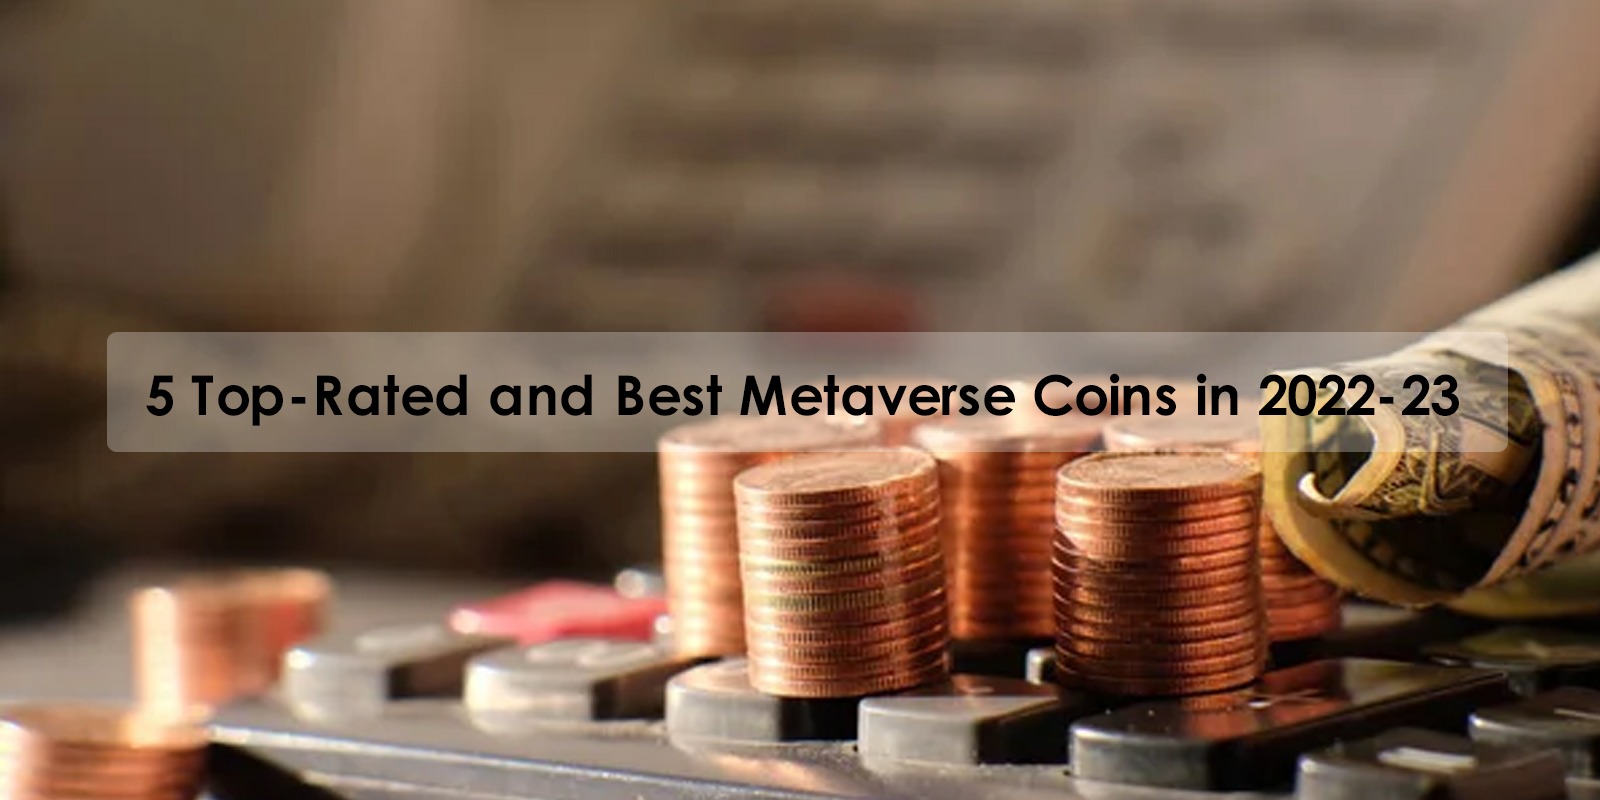 5 Top-Rated and Best Metaverse Coins in 2022-23